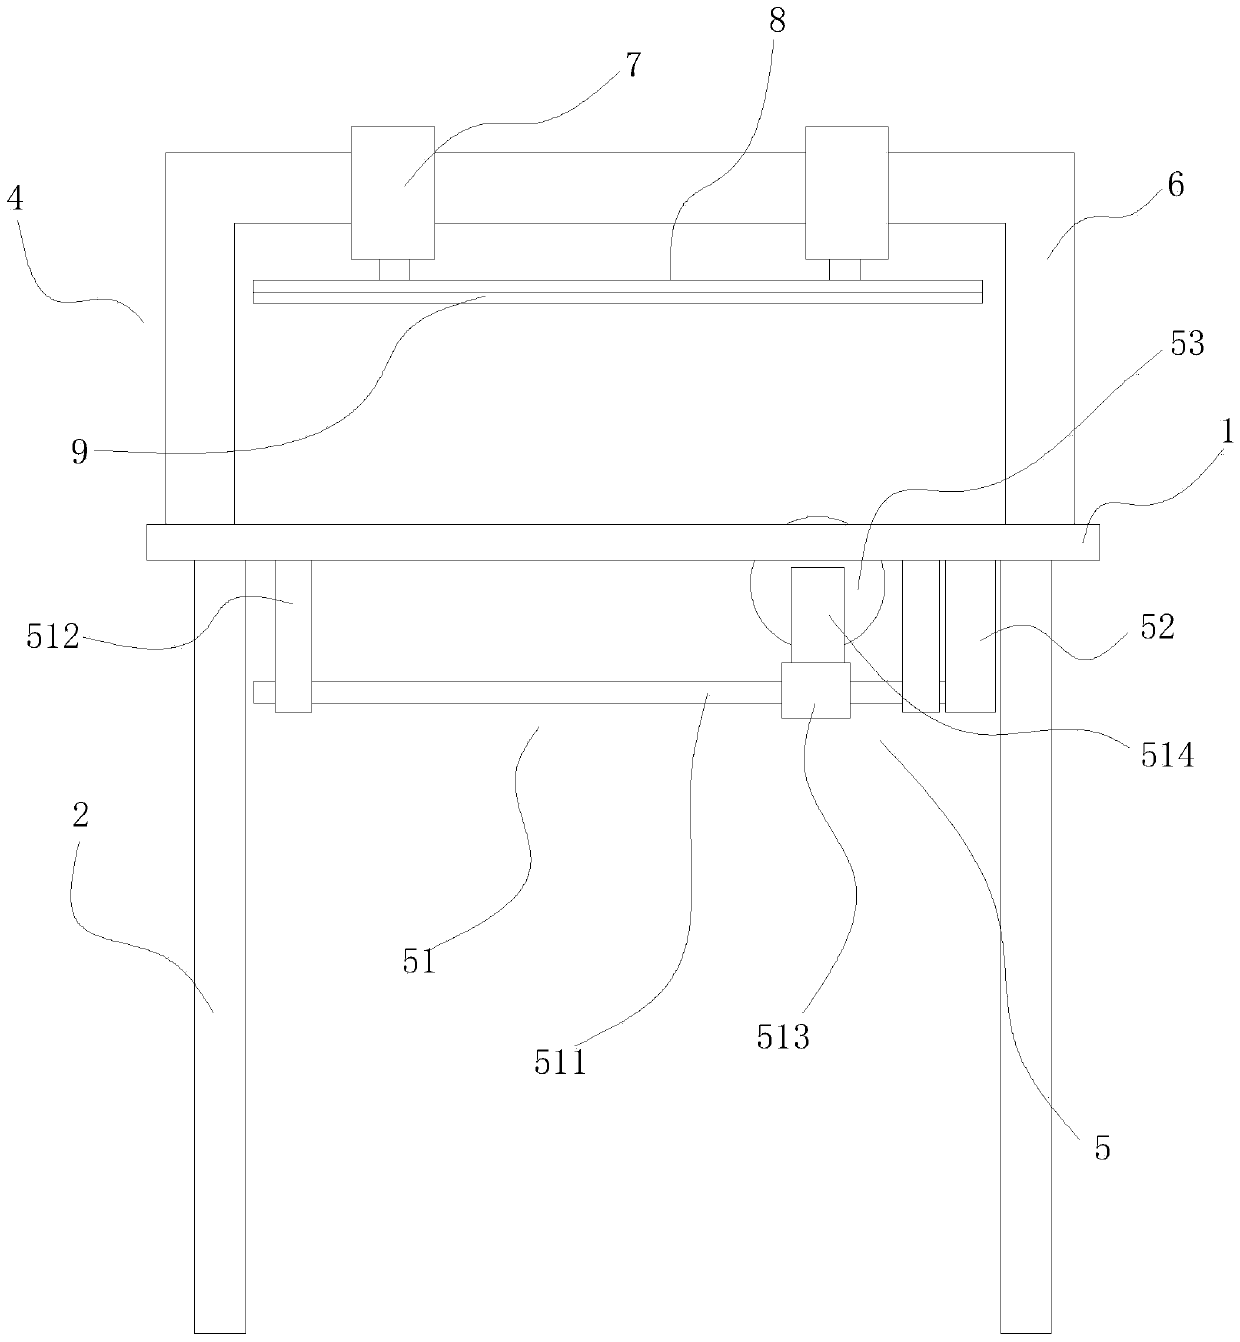 Tailoring device for clothing manufacture